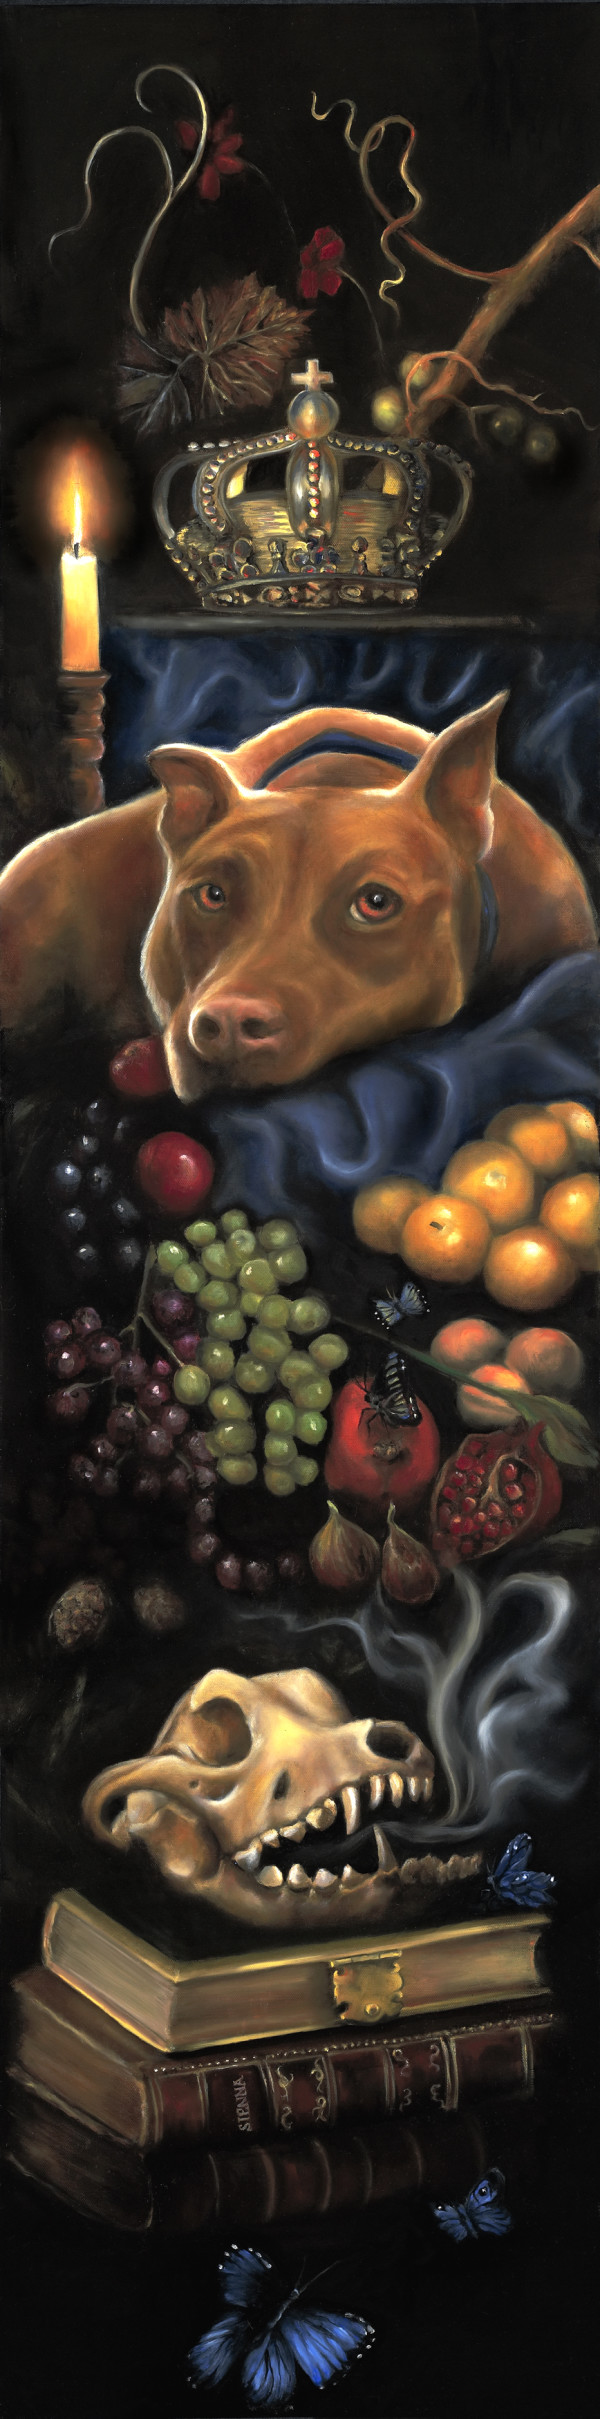 YEAR OF THE DOG - ORIGINAL OIL PAINTING by Angie Jones